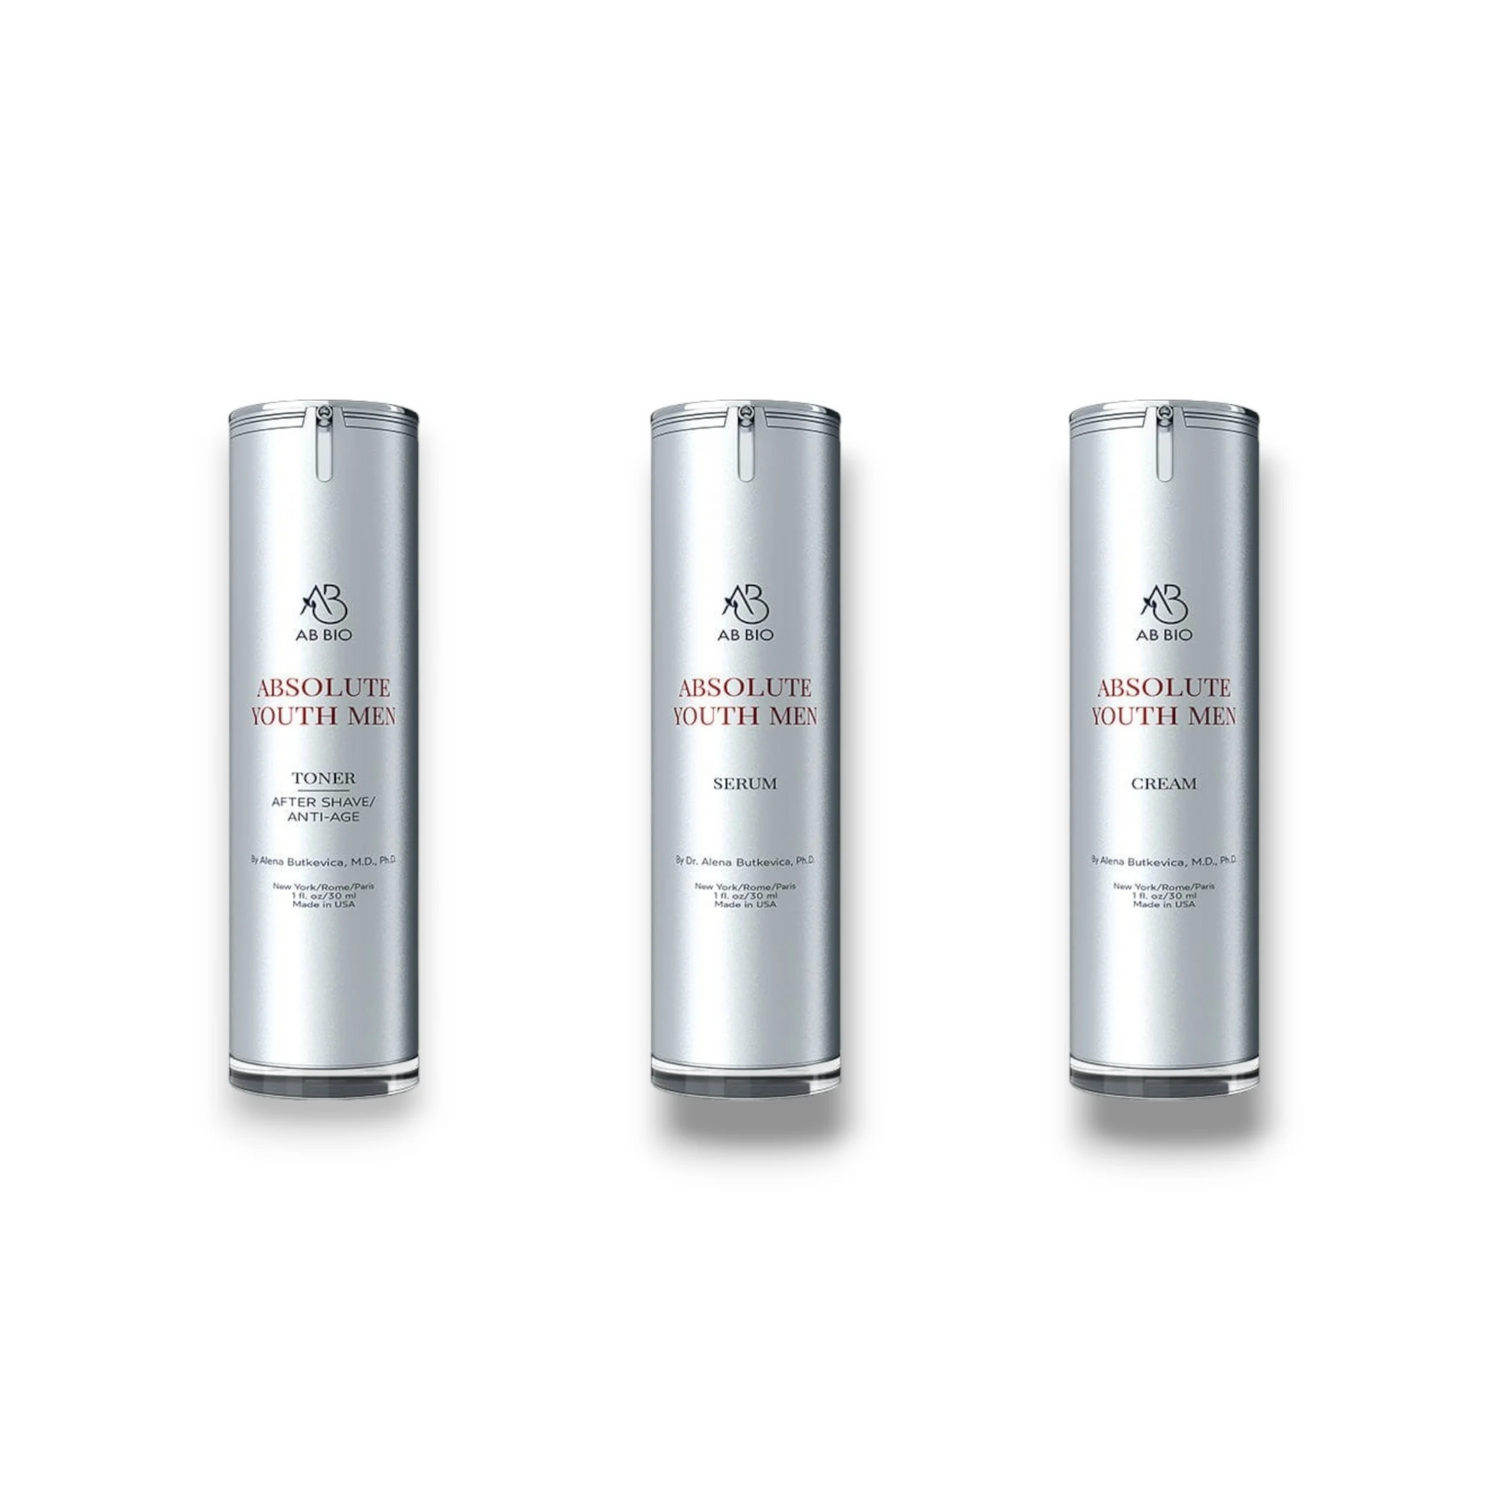 All-in-One TRIO Anti-Aging Treatment for Men